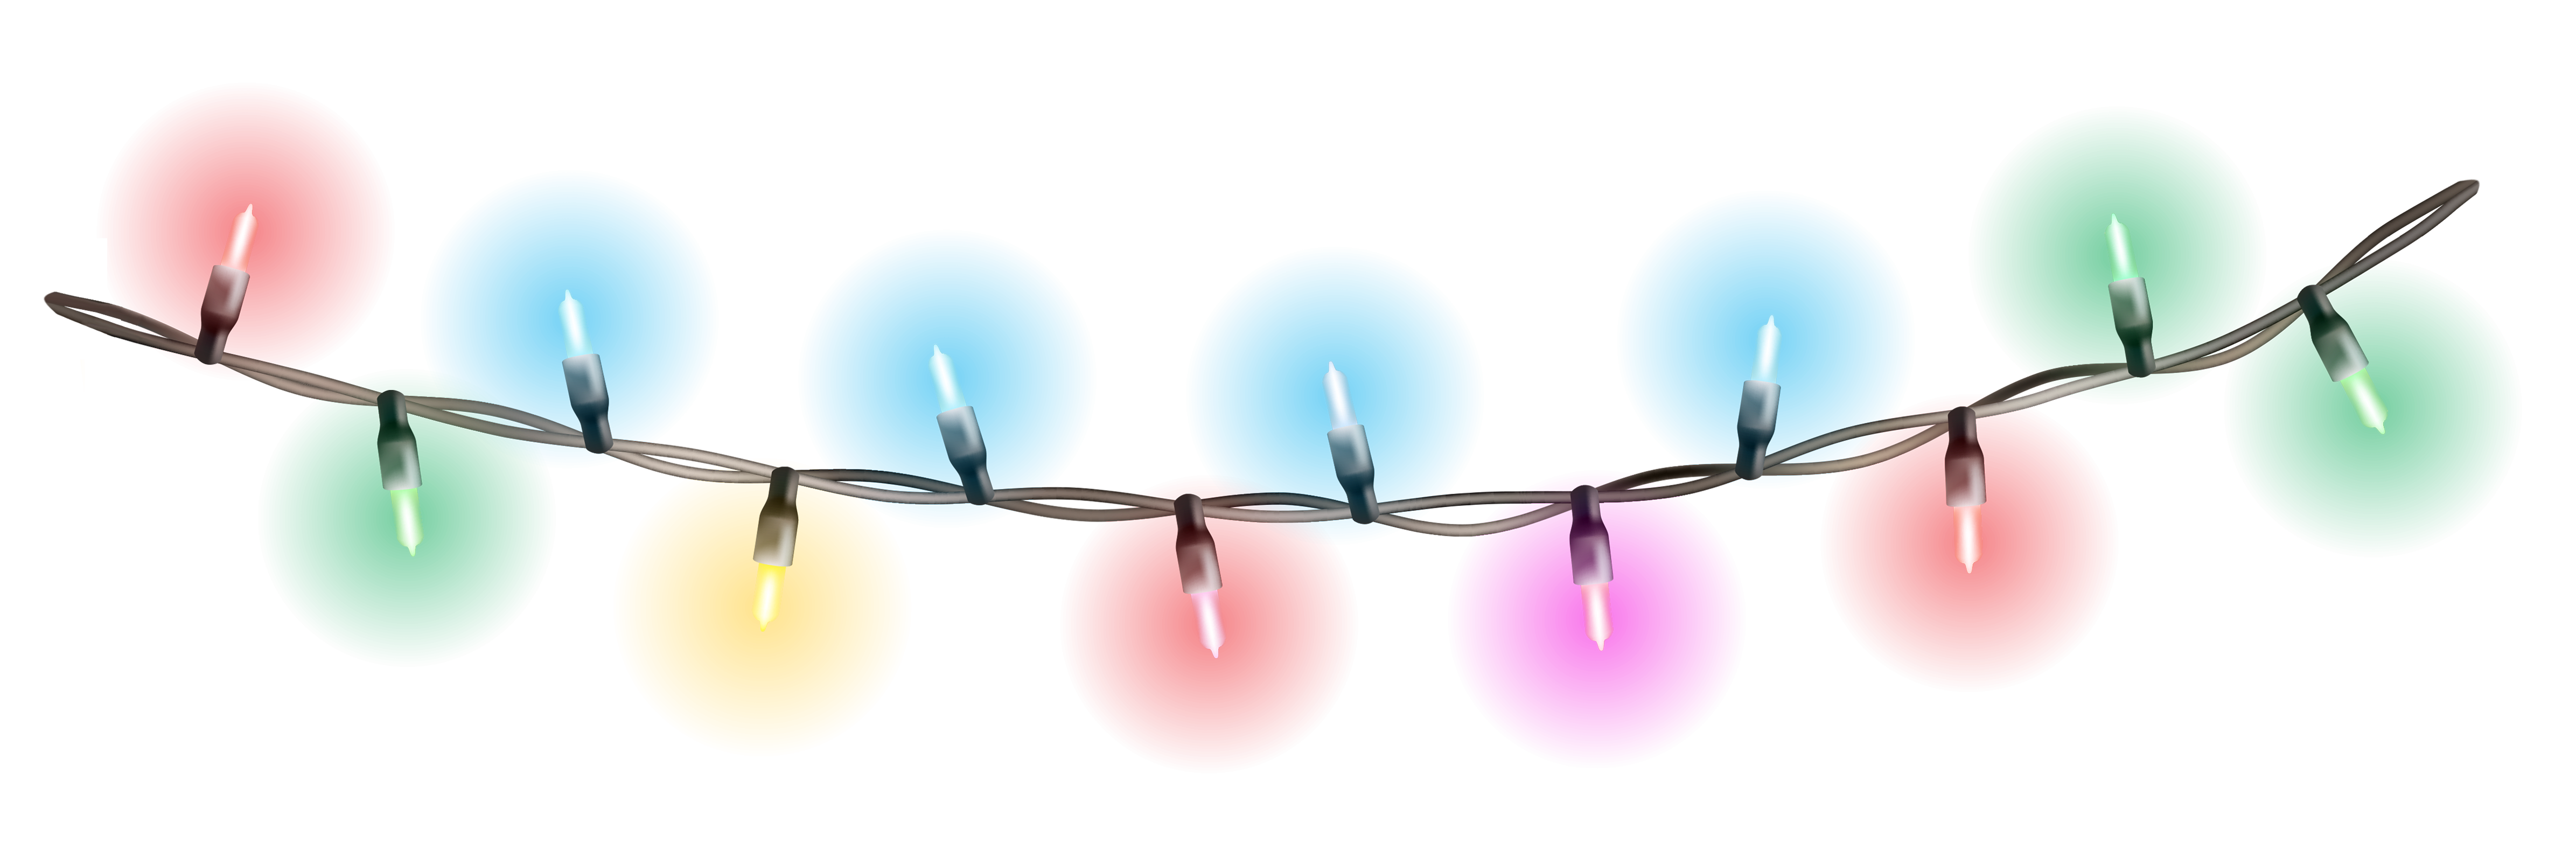 Christmas Decoration Lights Png Picture - Christmas Lights, Transparent background PNG HD thumbnail